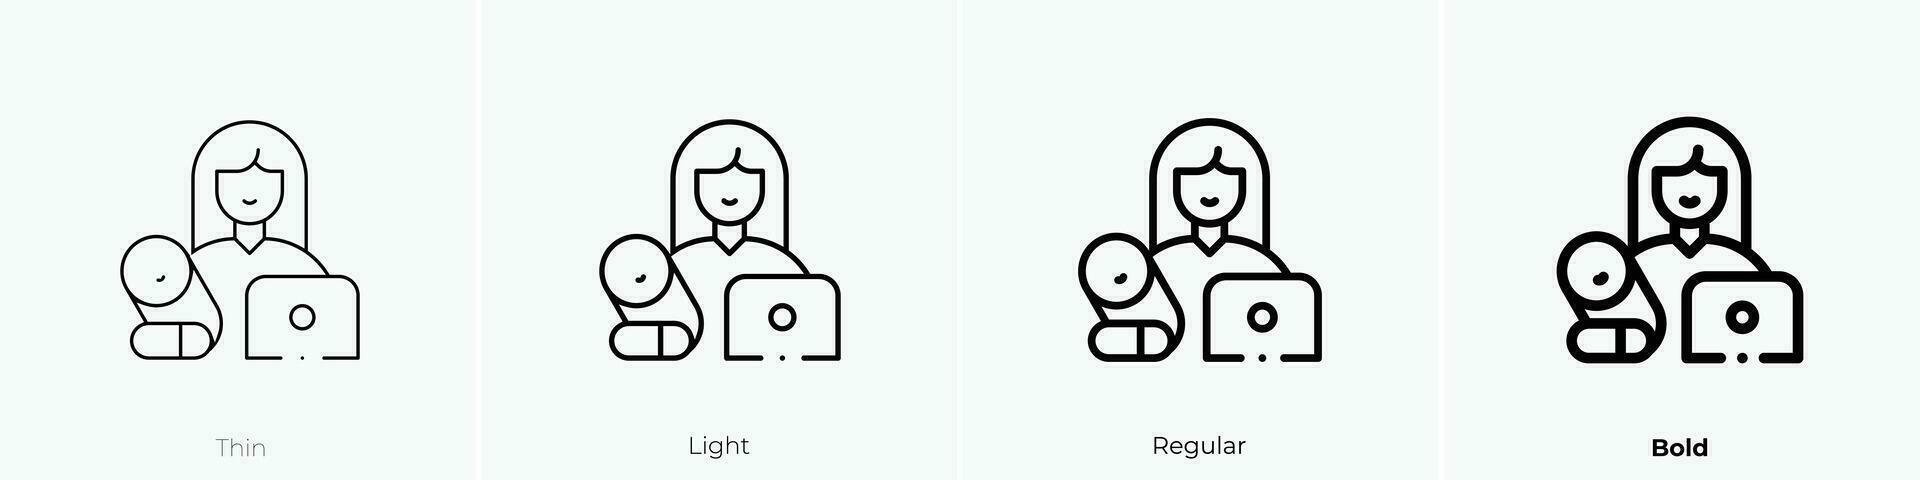 working mother icon. Thin, Light, Regular And Bold style design isolated on white background vector